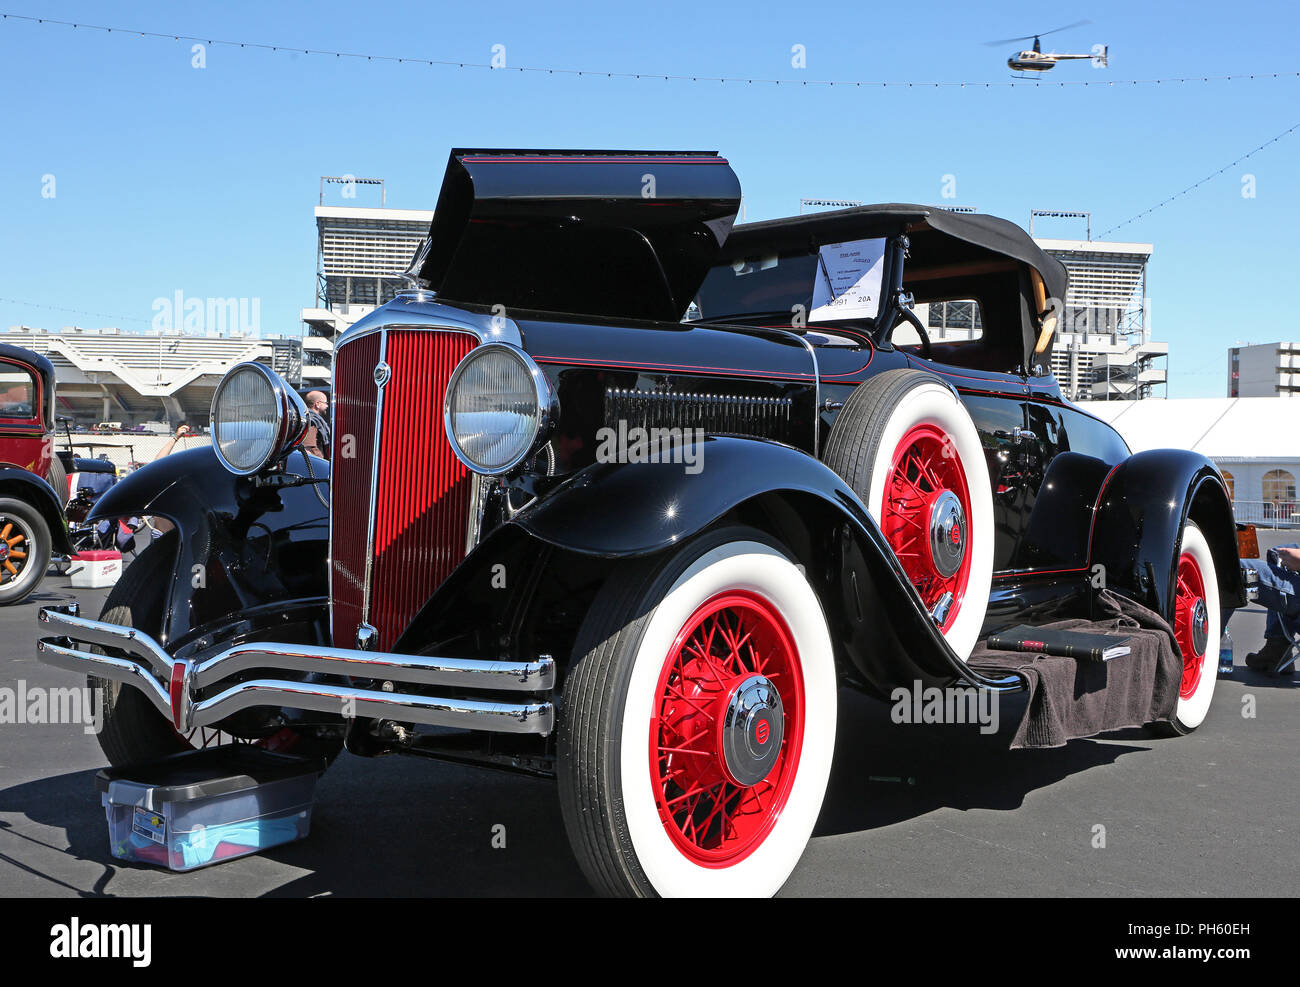 CONCORD, NC - April 8, 2017:  A 1931 Studebaker automobile on display at the Pennzoil AutoFair classic car show held at Charlotte Motor Speedway. Stock Photo